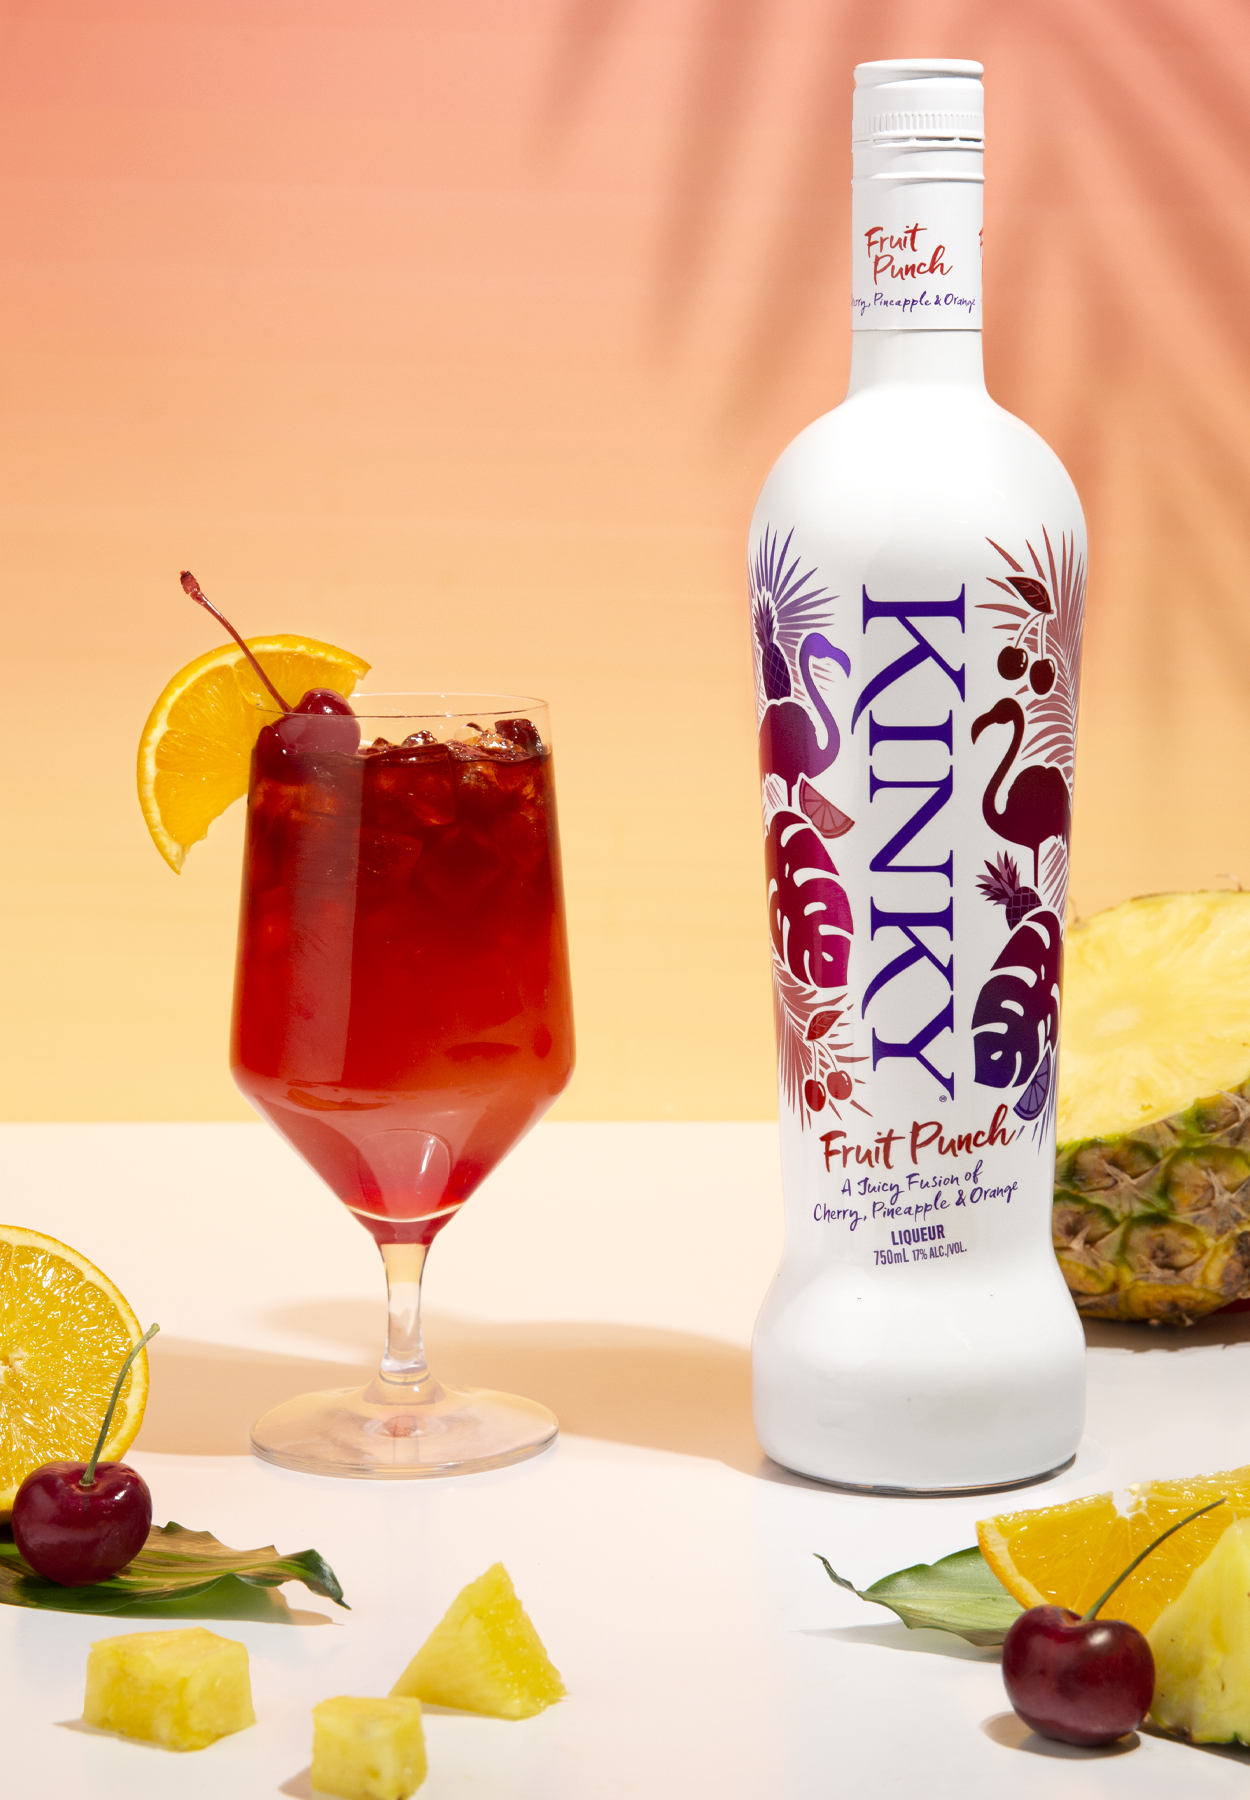 Kinky Fruit Punch Liqueur crafted with super premium vodka distilled 5 times